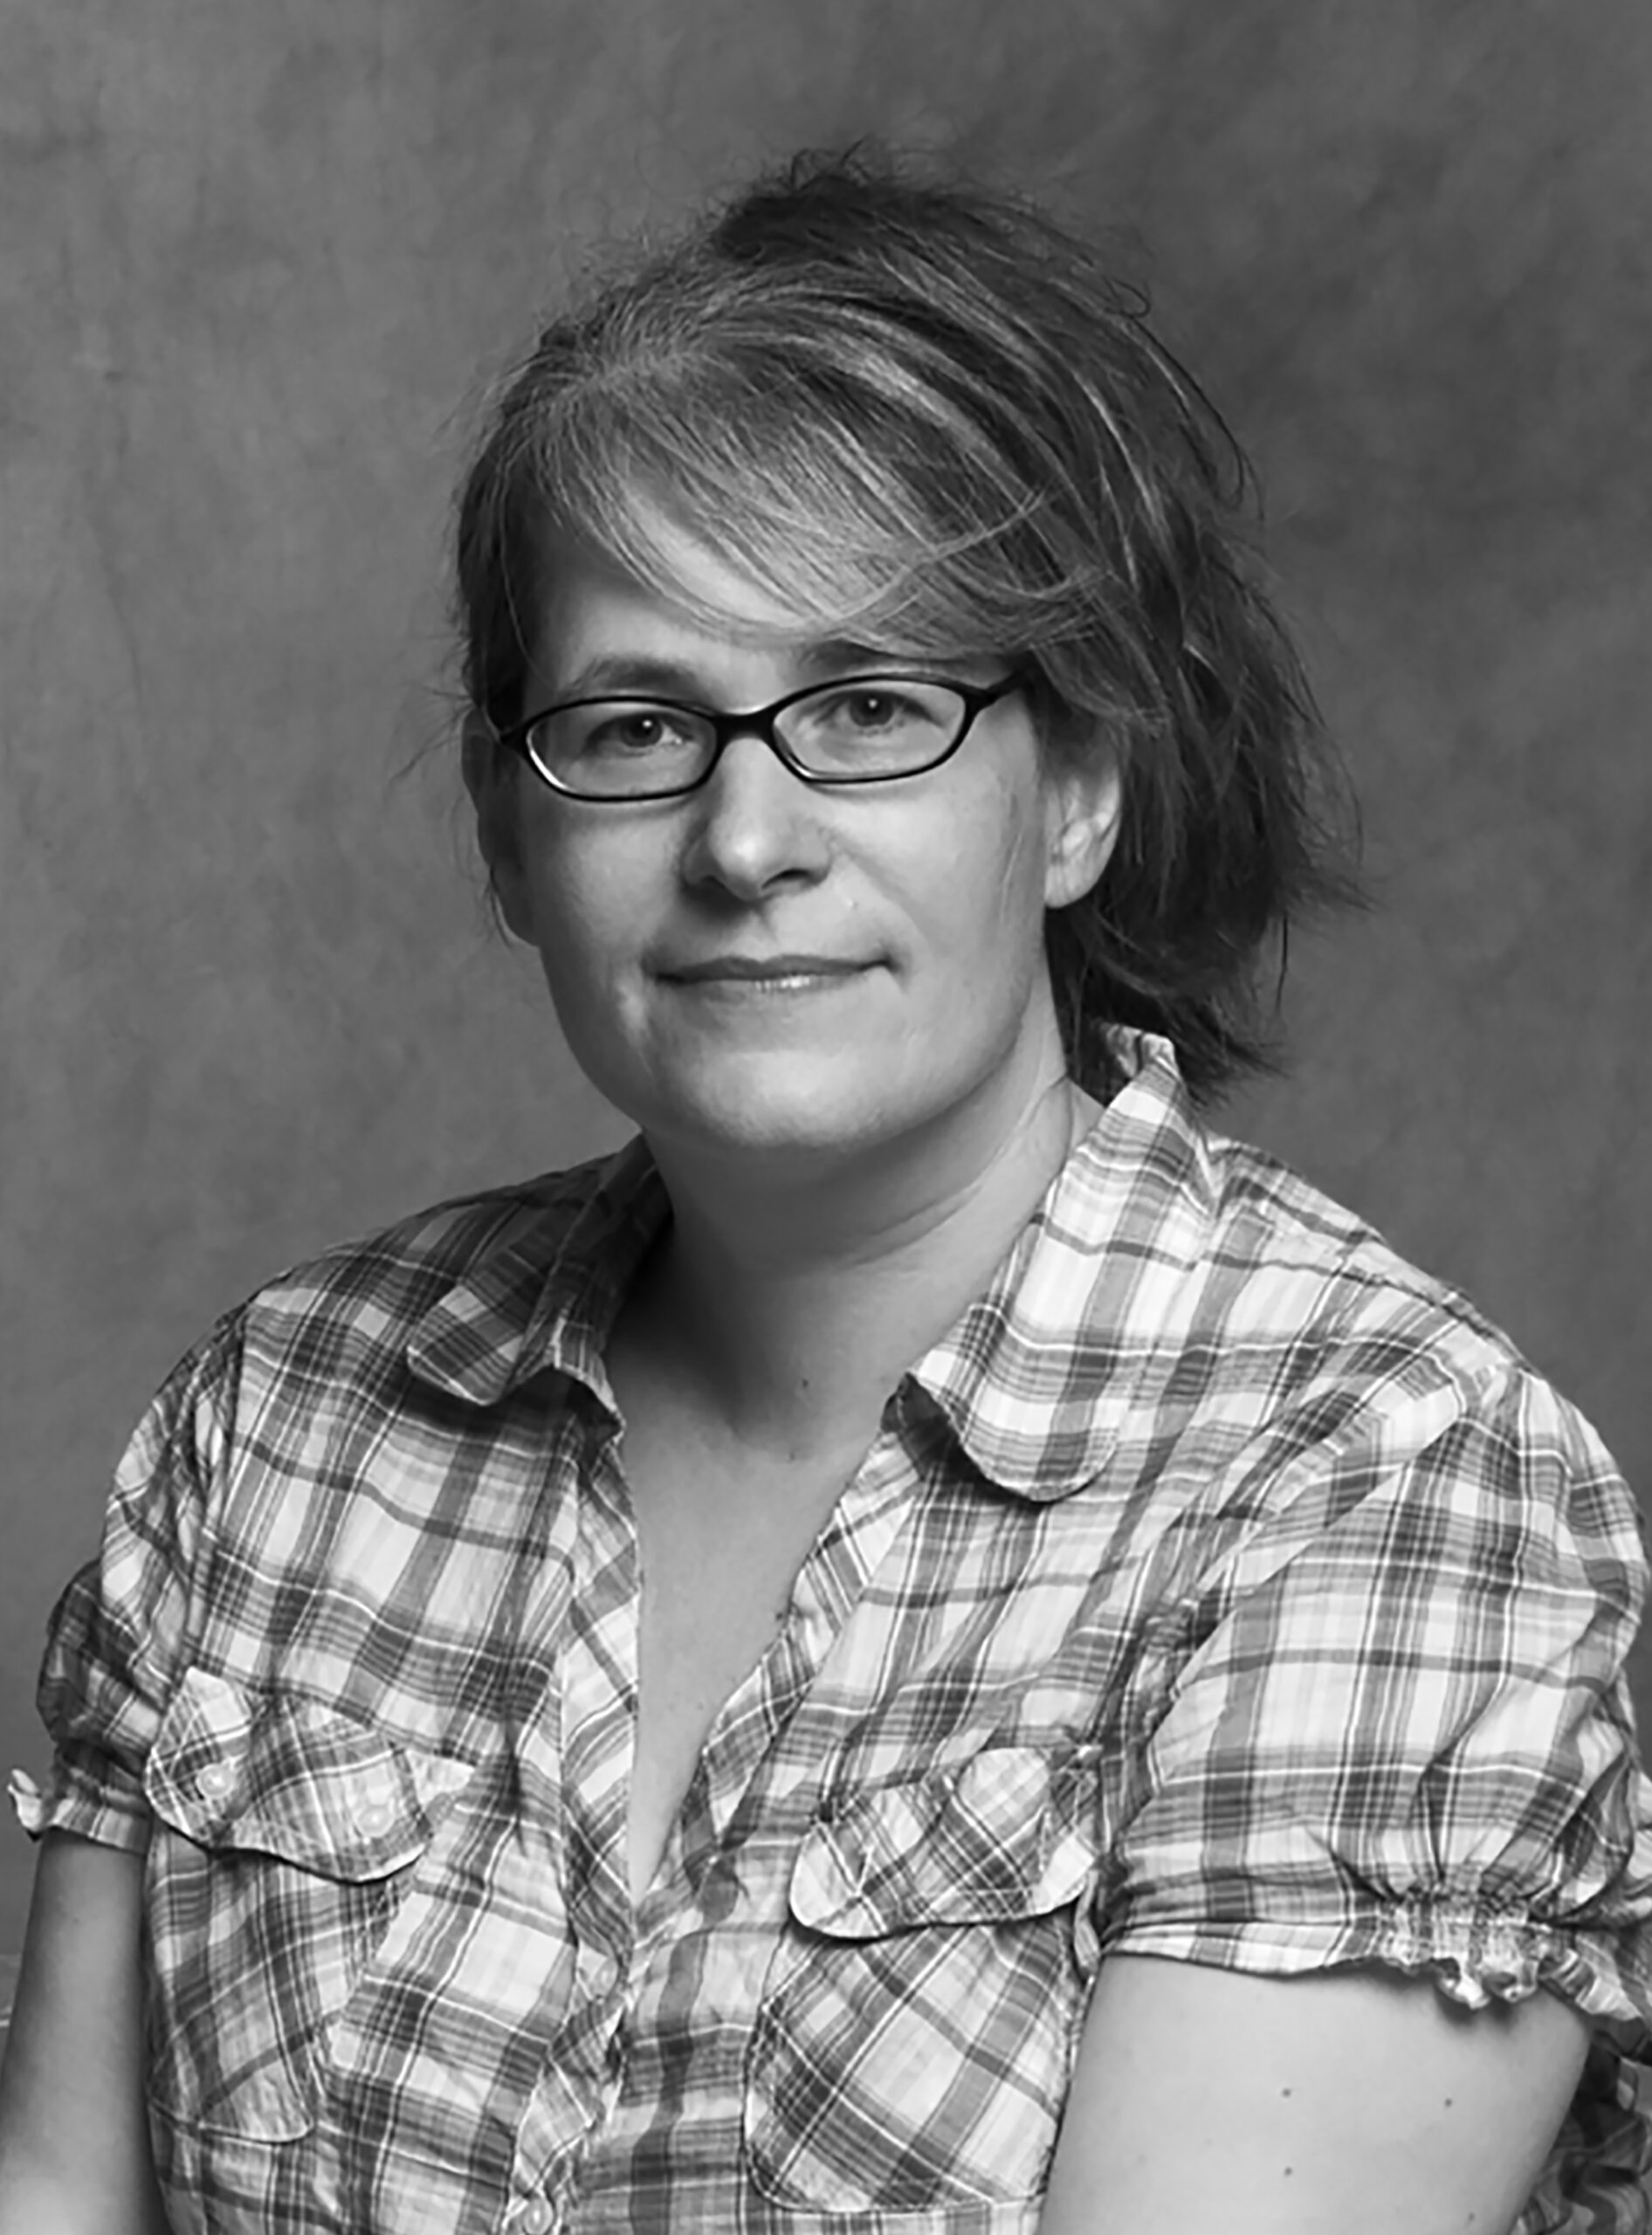 White woman with glasses and light brown hair swept back in a pony tail wearing a plaid short sleeved shirt against a grey background.